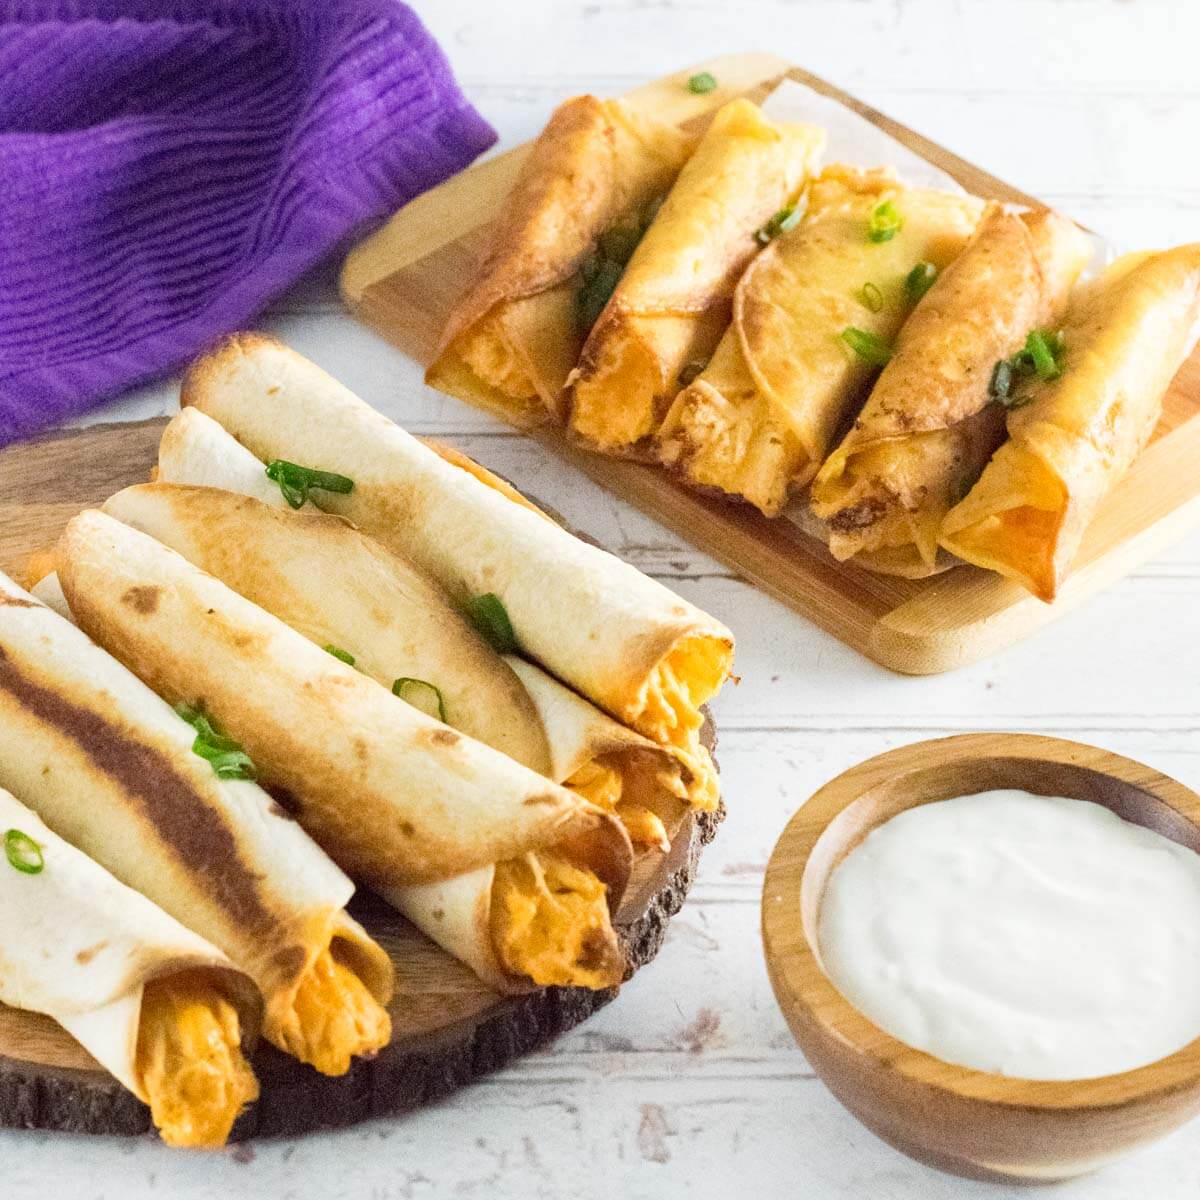 BUFFALO CHICKEN TAQUITOS - BAKED OR FRIED